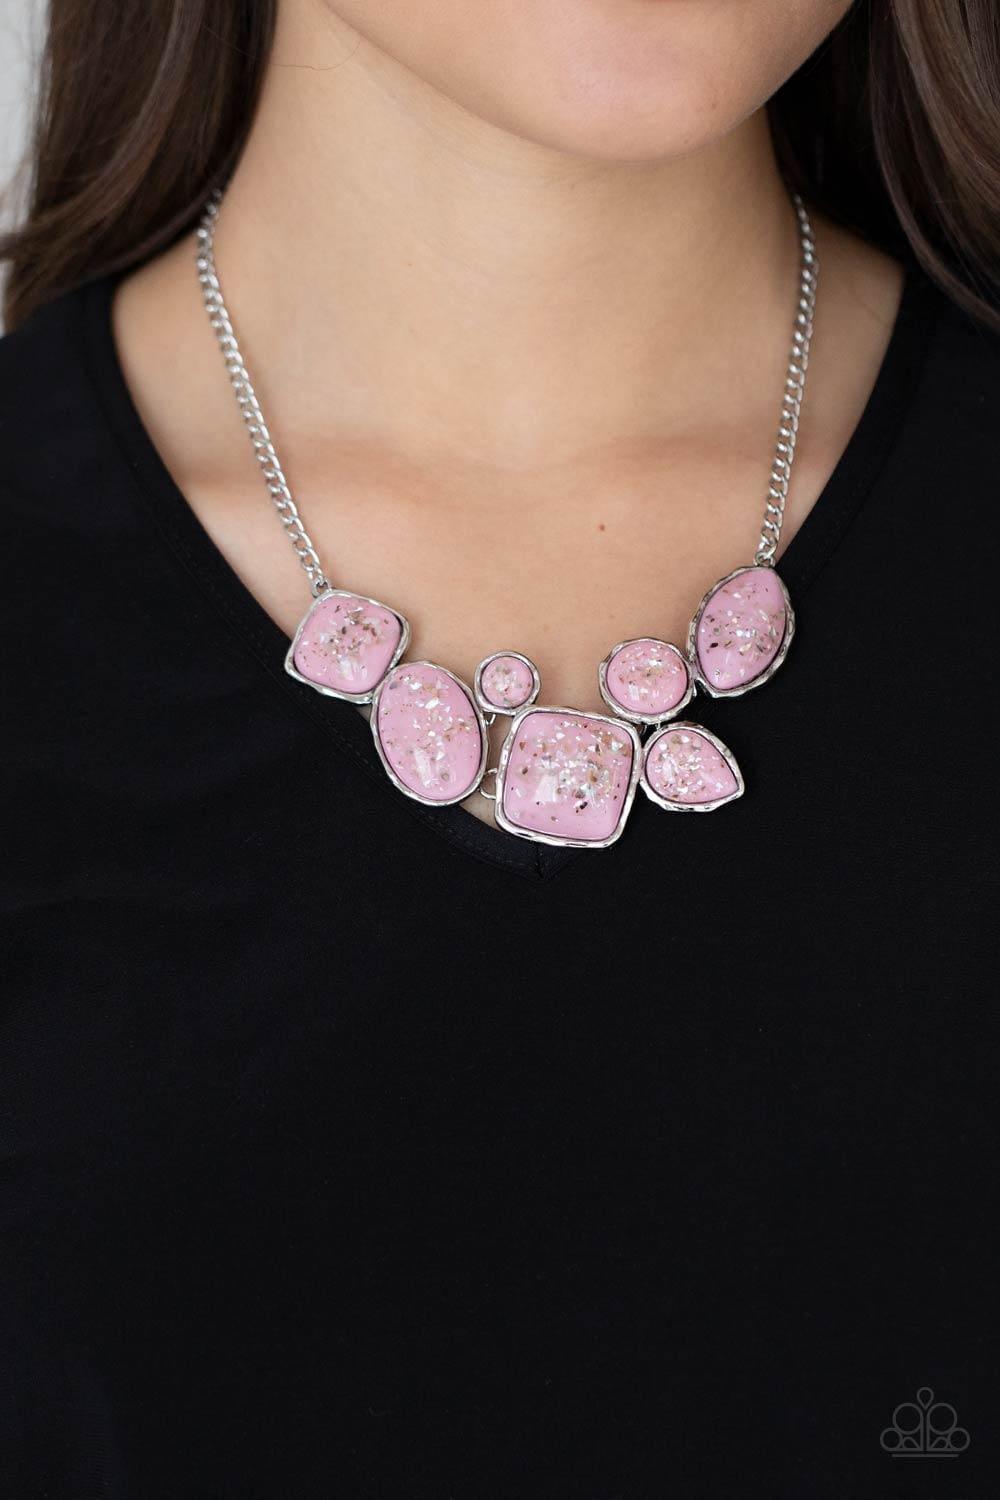 Paparazzi Accessories - So Jelly - Pink Necklace - Bling by JessieK